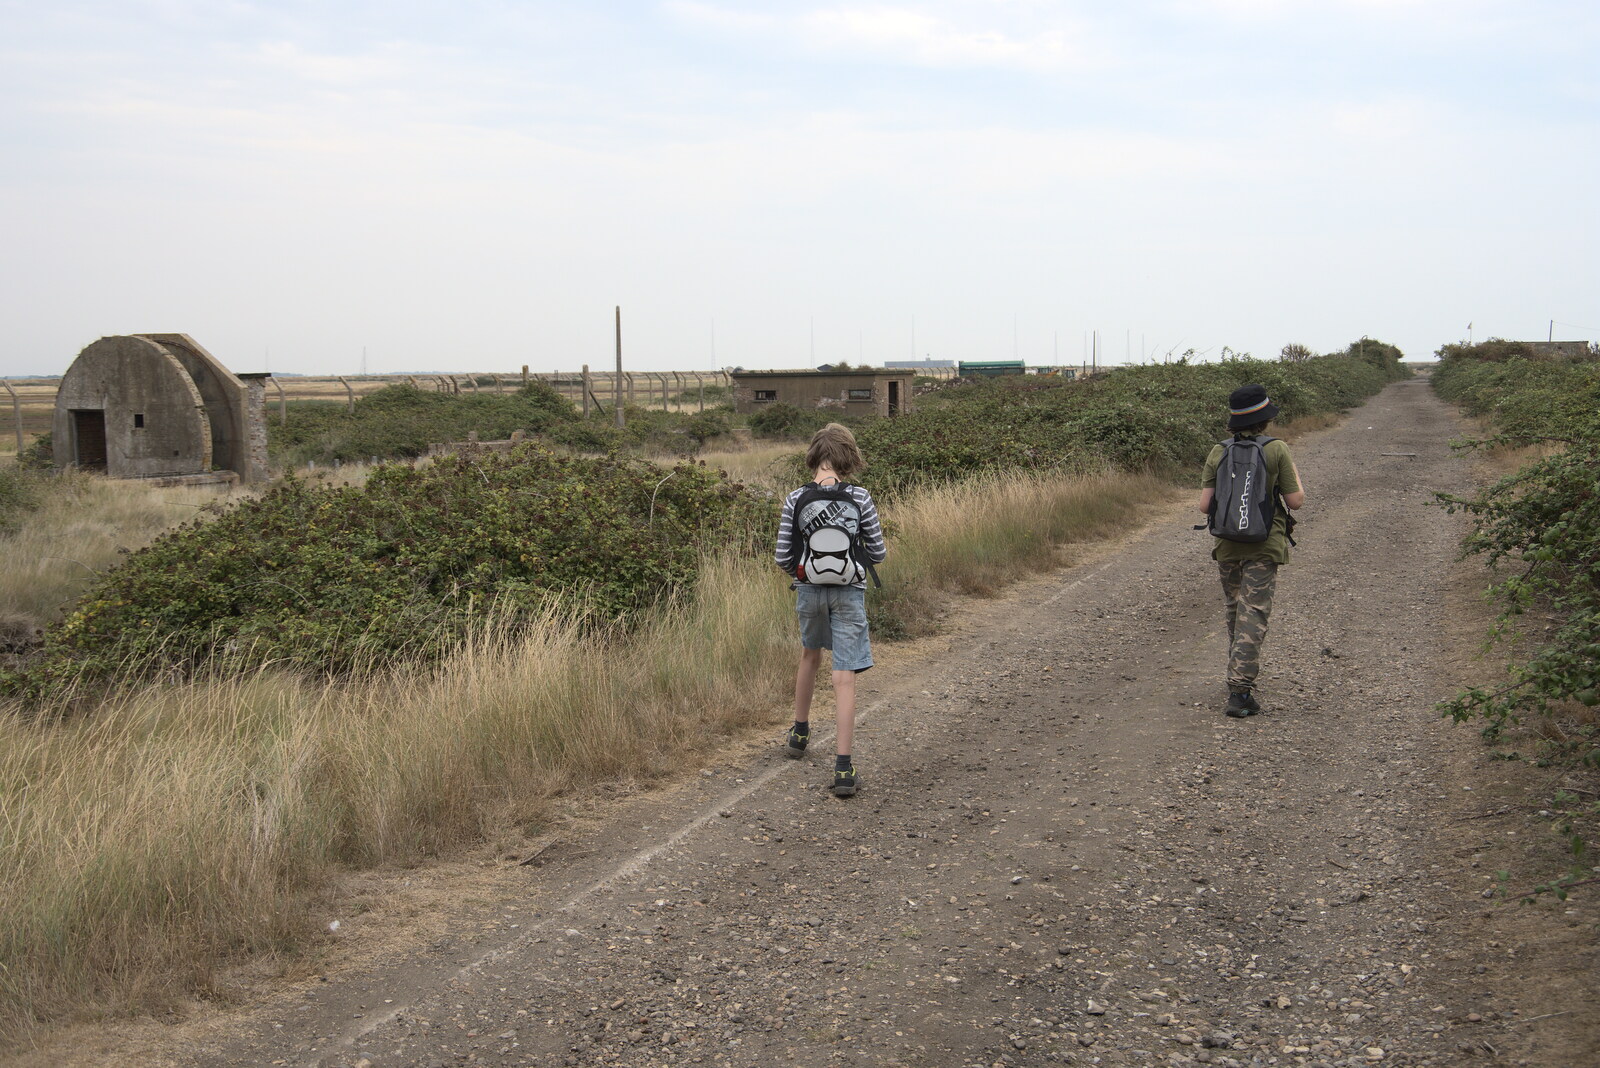 The boys roam the red route from A Trip to Orford Ness, Orford, Suffolk - 16th August 2022